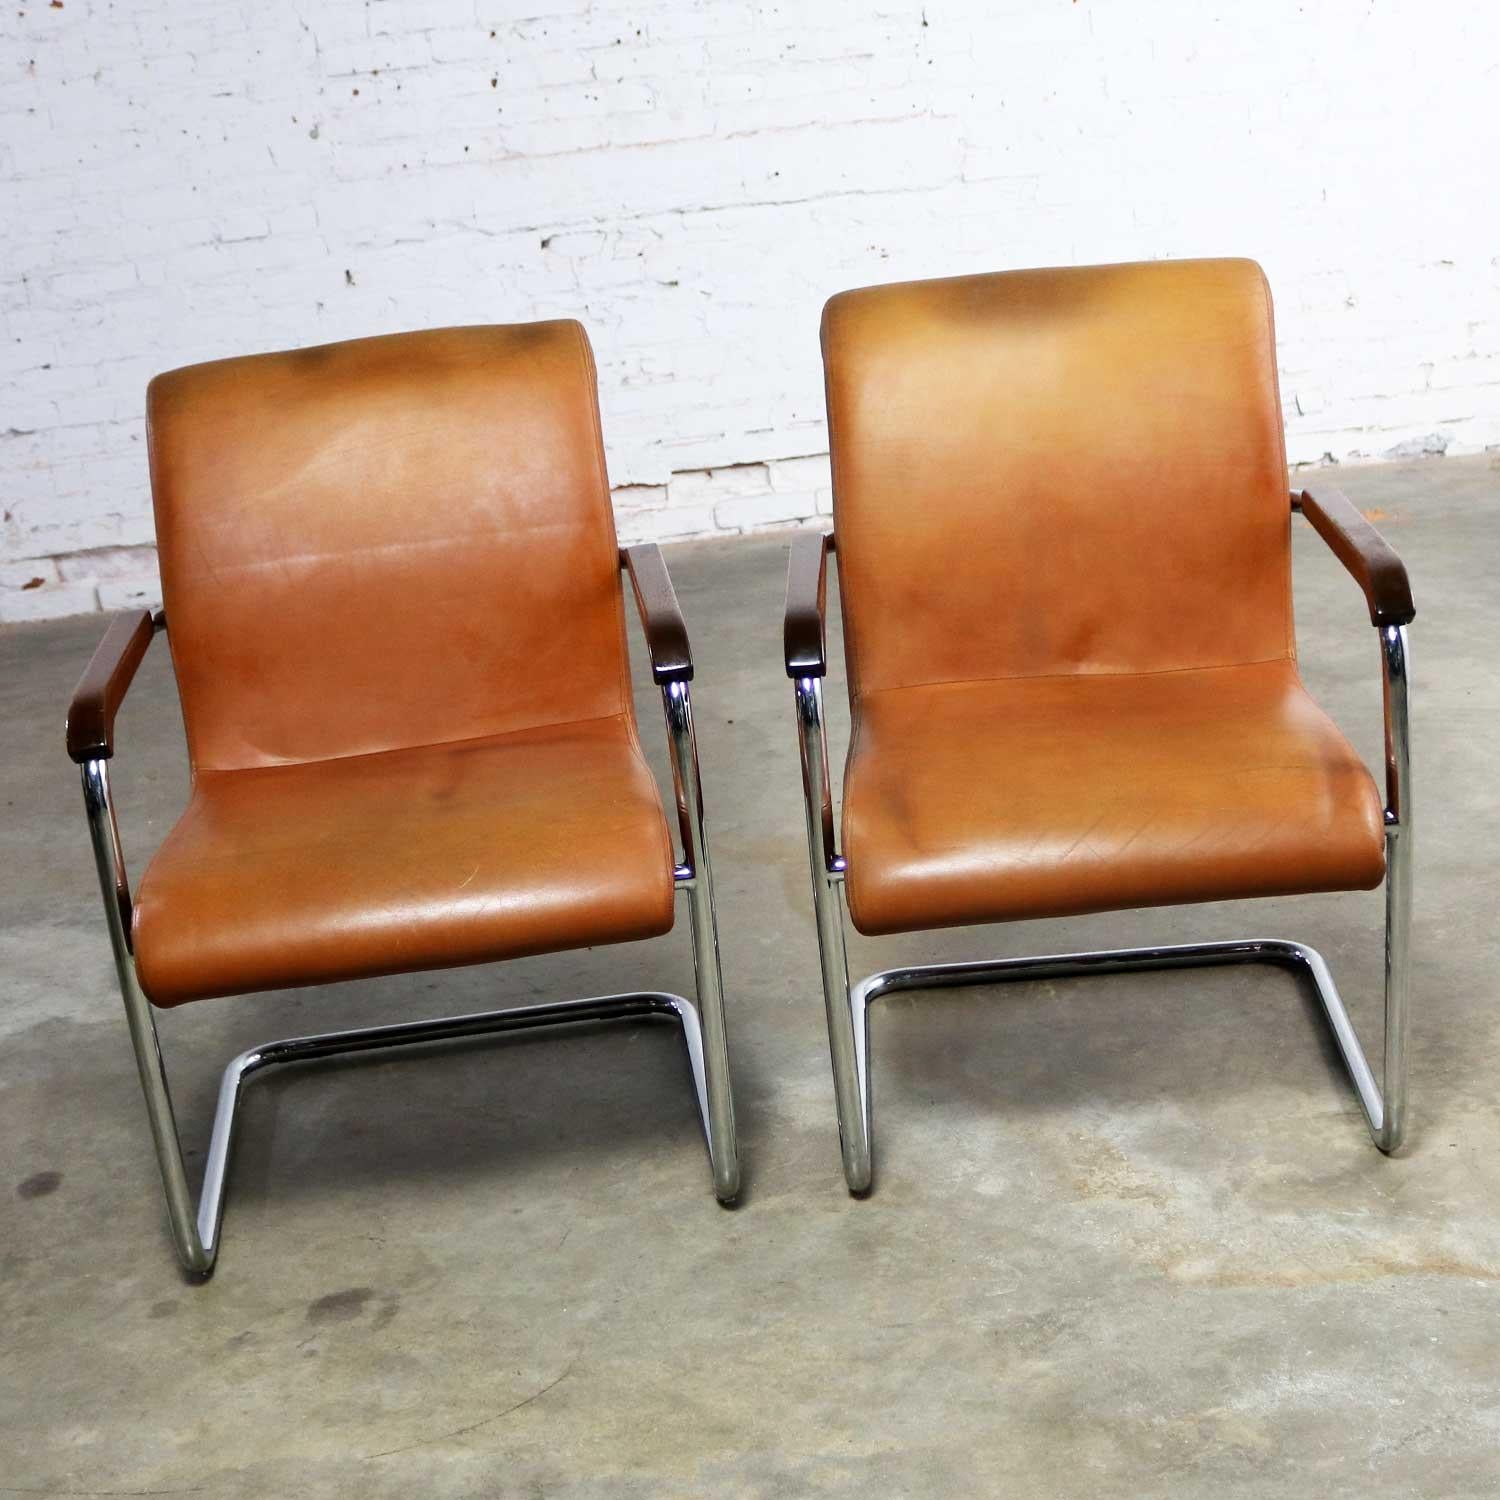 Canadian Cantilevered Chrome Cognac Leather Chairs Mid-Century Modern